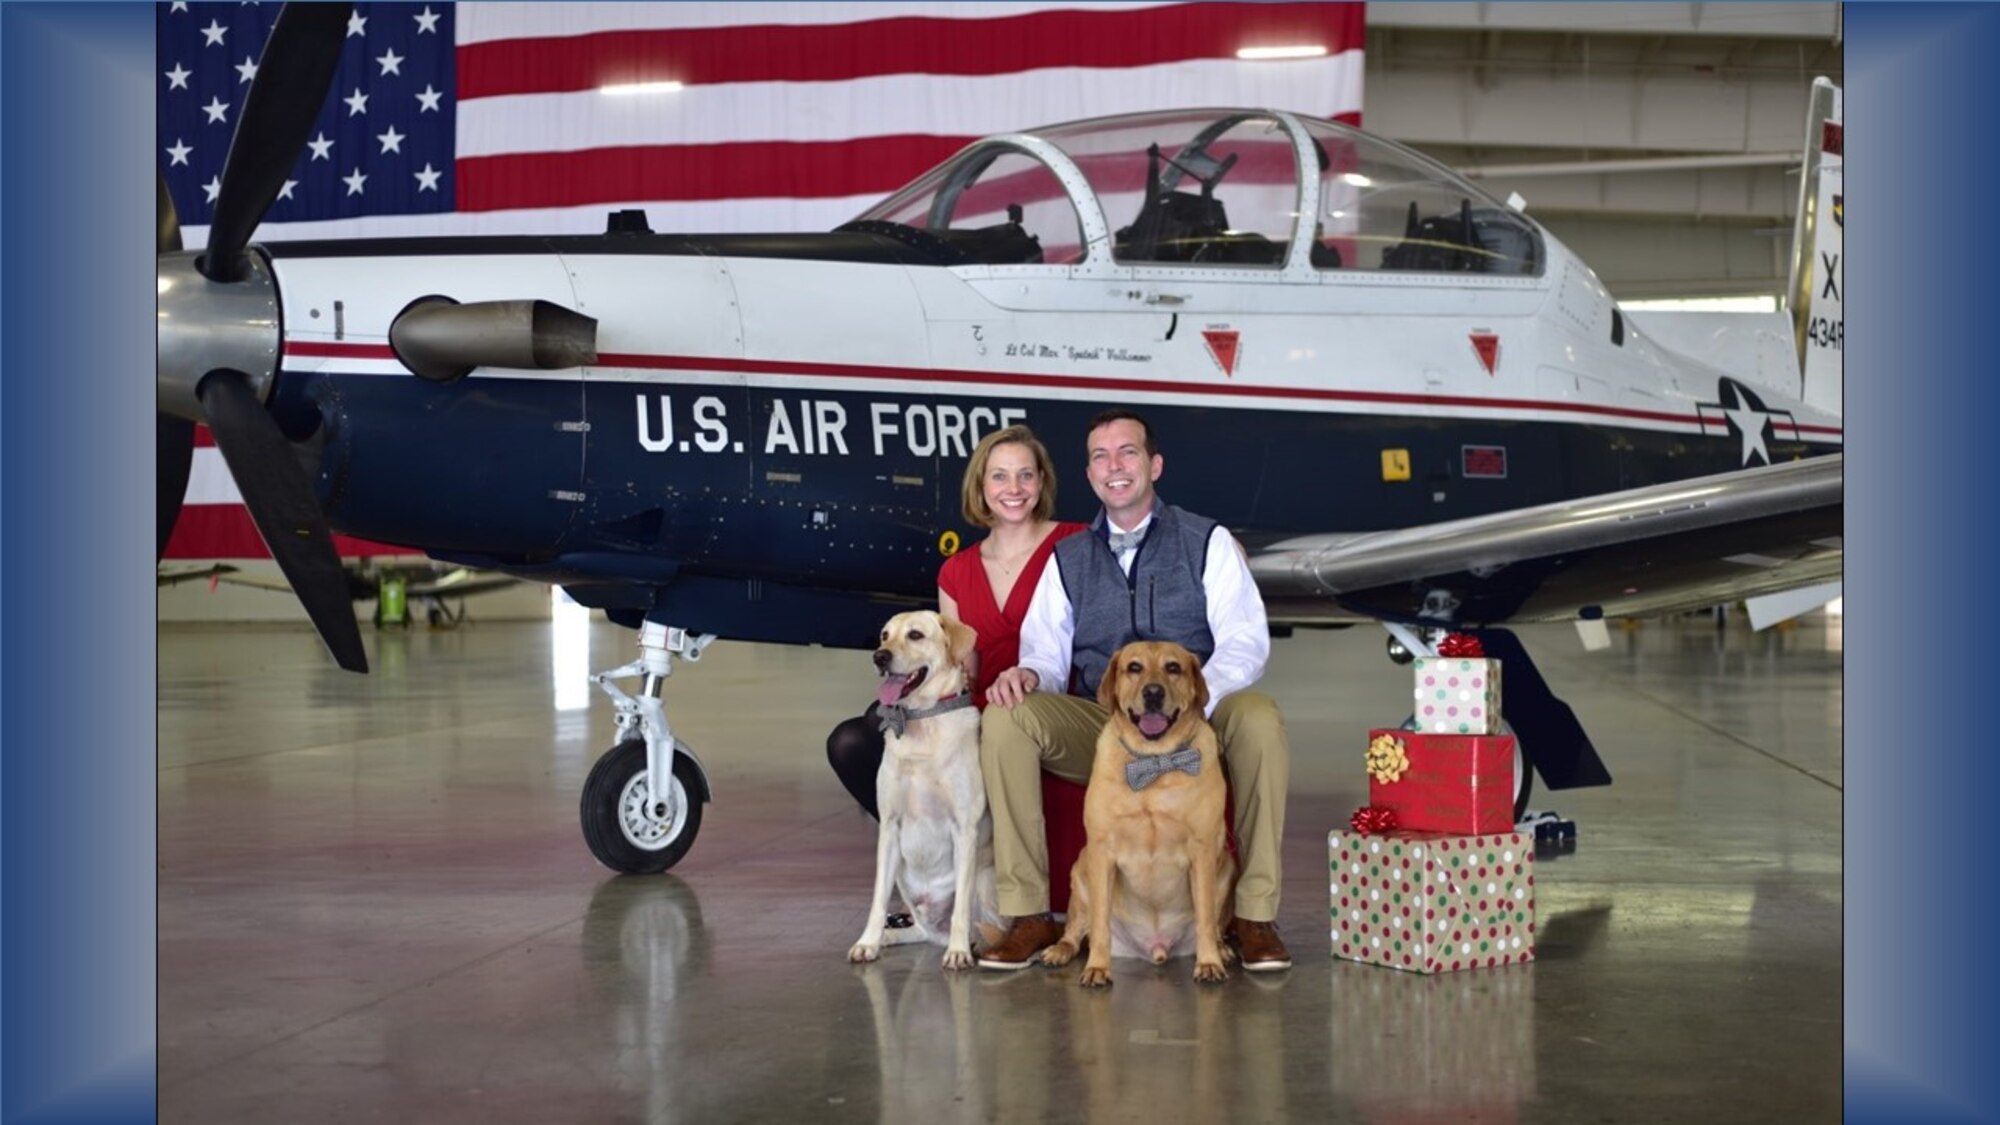 Air Force Reserve Citizen Airman Maj. Hilary Foley, 96th Flying Training Squadron T-1 Jayhawk instructor pilot, Laughlin Air Force Base, Texas, poses for a holiday family portrait with her husband, 85th Flying Training Squadron Commander Lt. Col. Bryan Foley, and their yellow lab “kids,” Weston and Chase. As a former active duty C-5 pilot, current Reserve instructor pilot and wife of an active duty squadron commander, Major Foley has the perfect experience and background to help “bridge the gap” between active and Reserve teammates and families. (Courtesy photo)